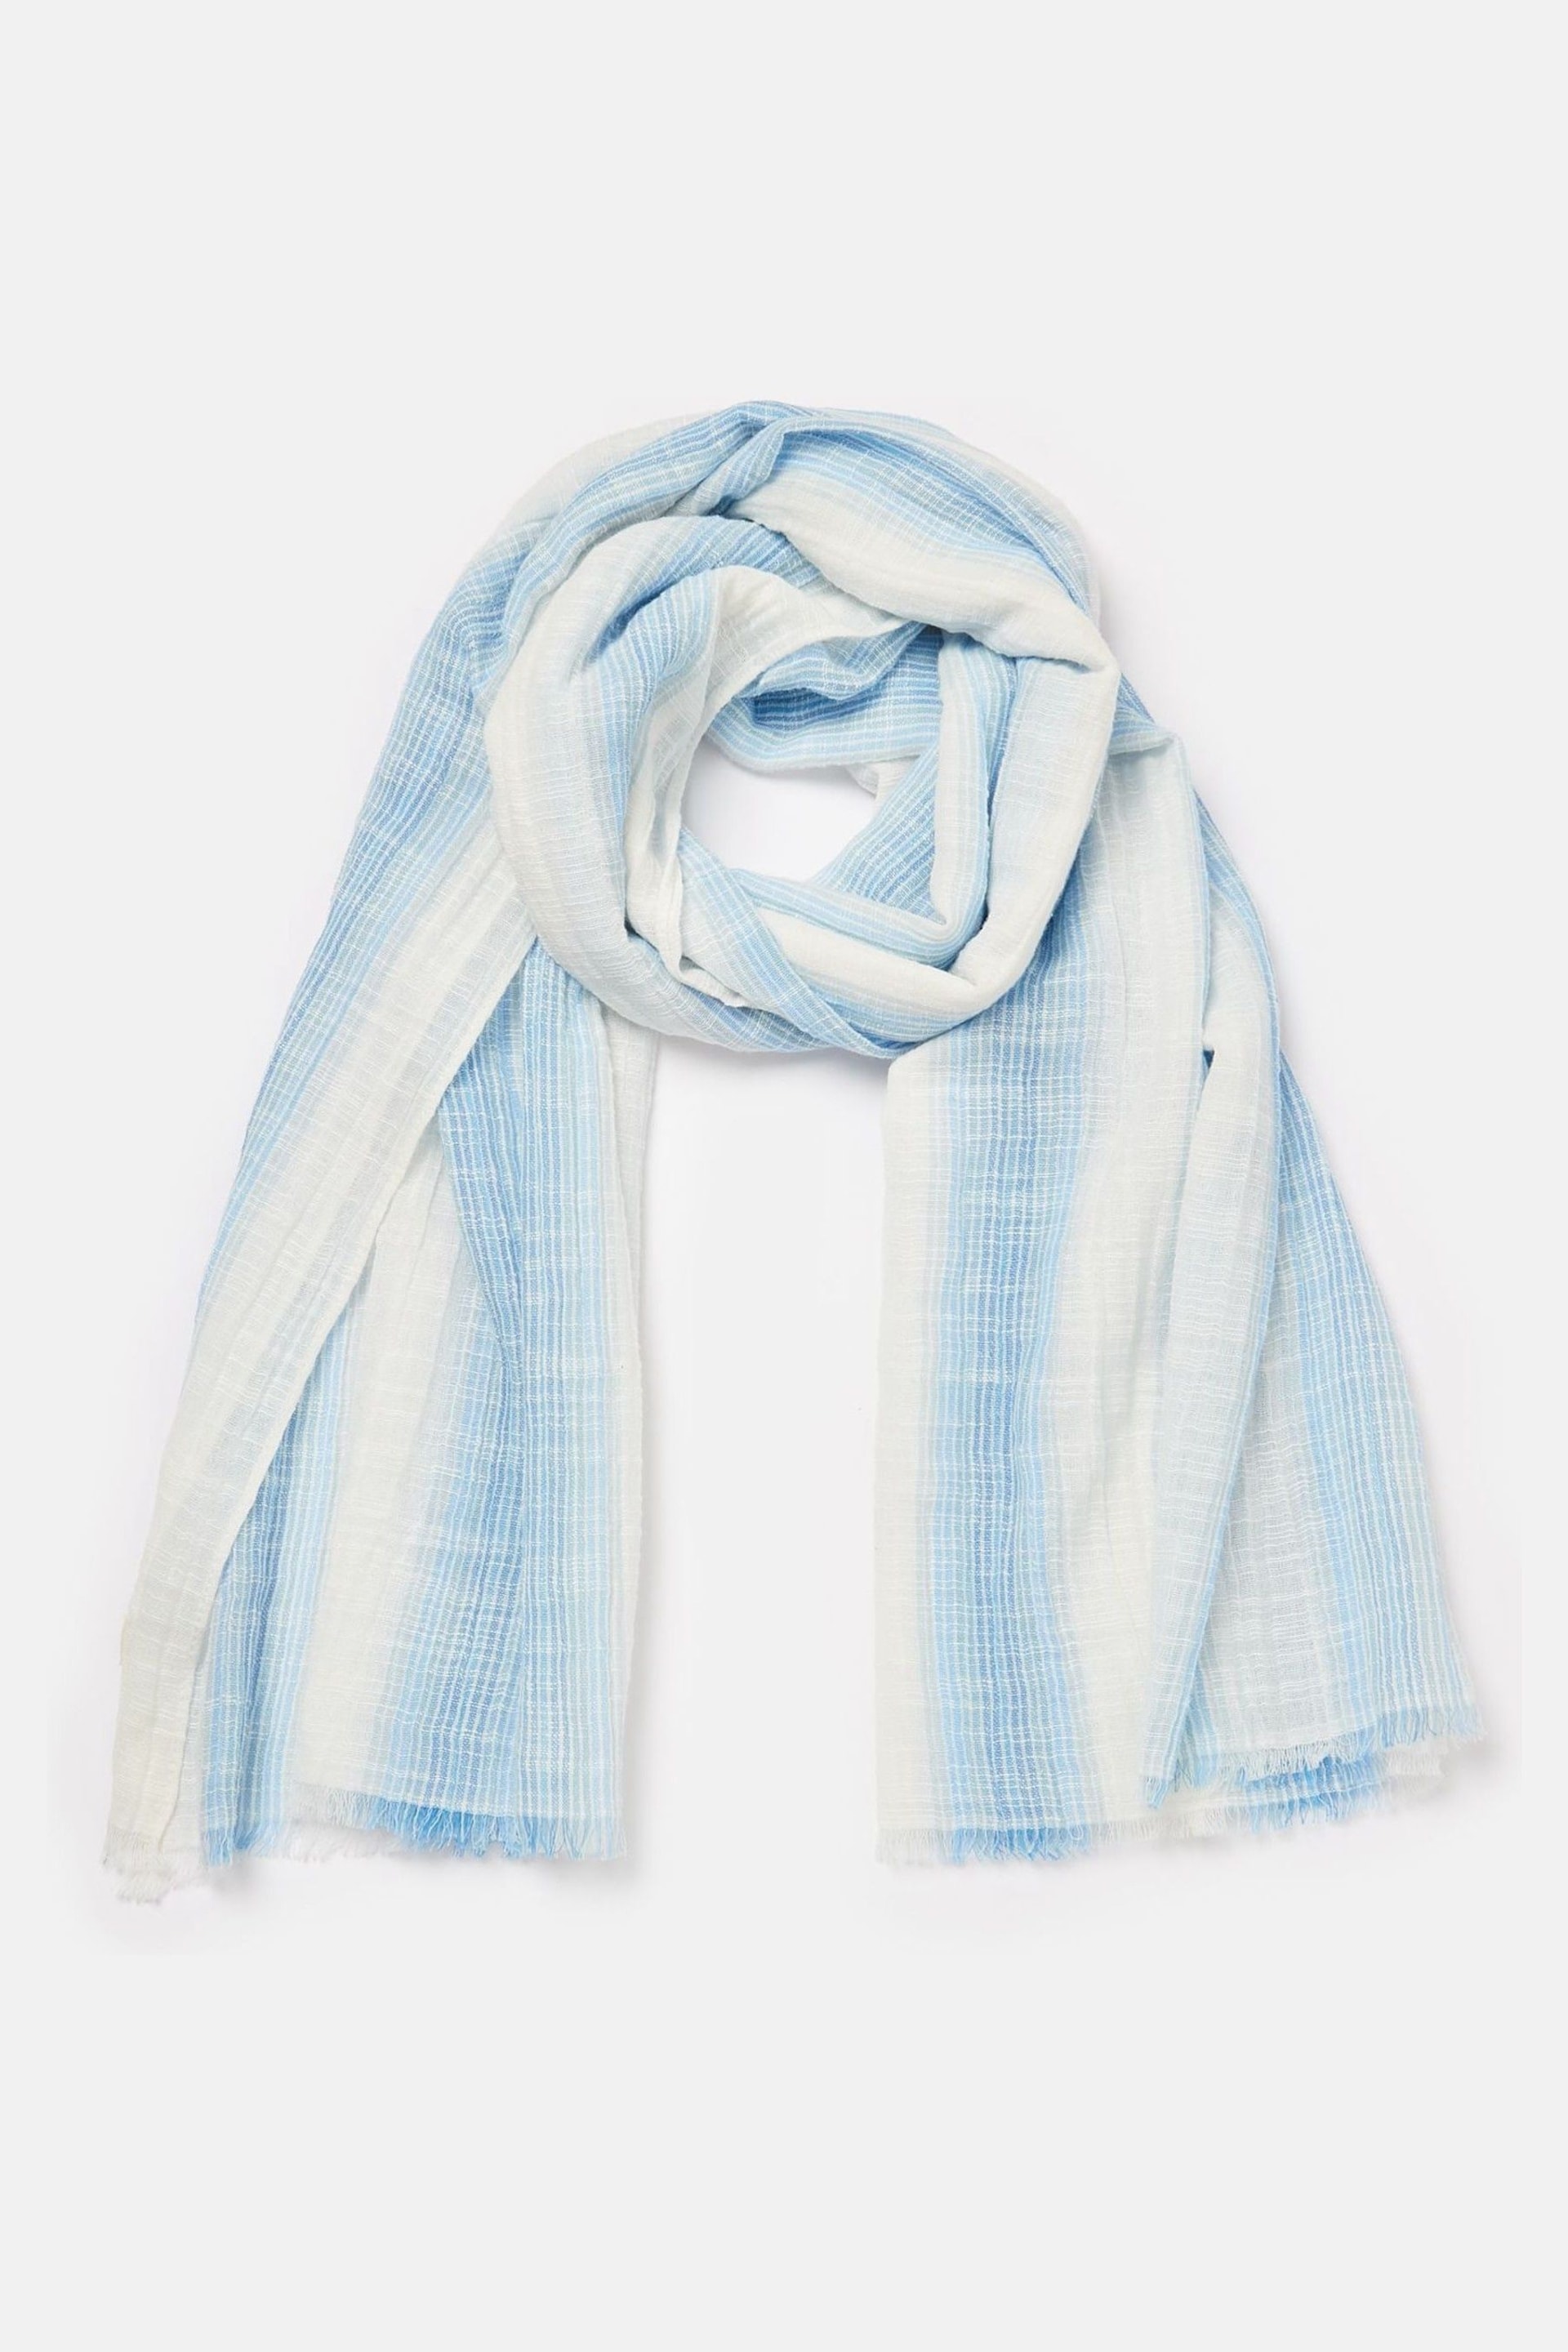 Joules Orla Blue/White Scarf - Image 3 of 5